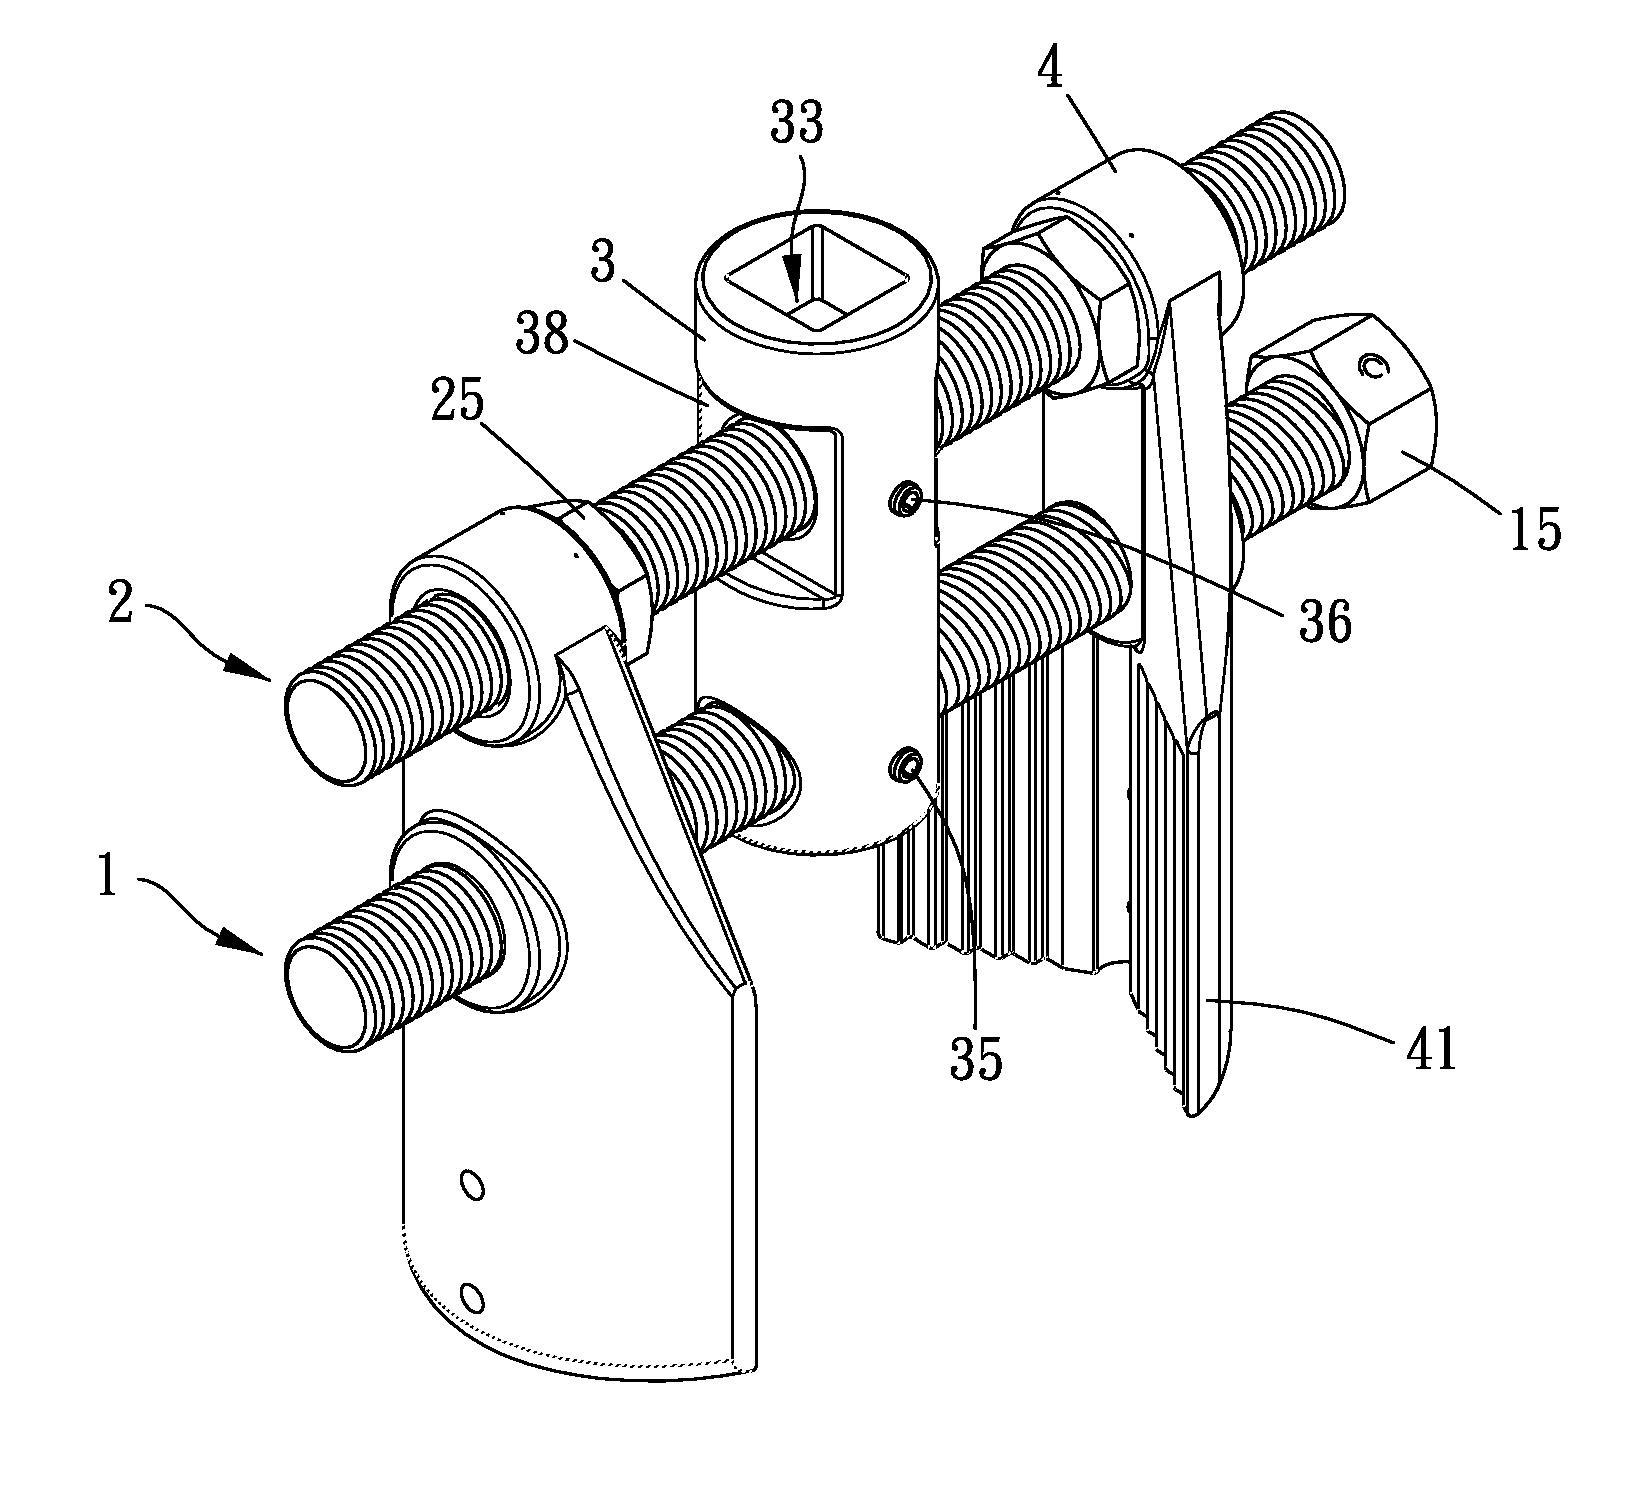 Nut disassembling device